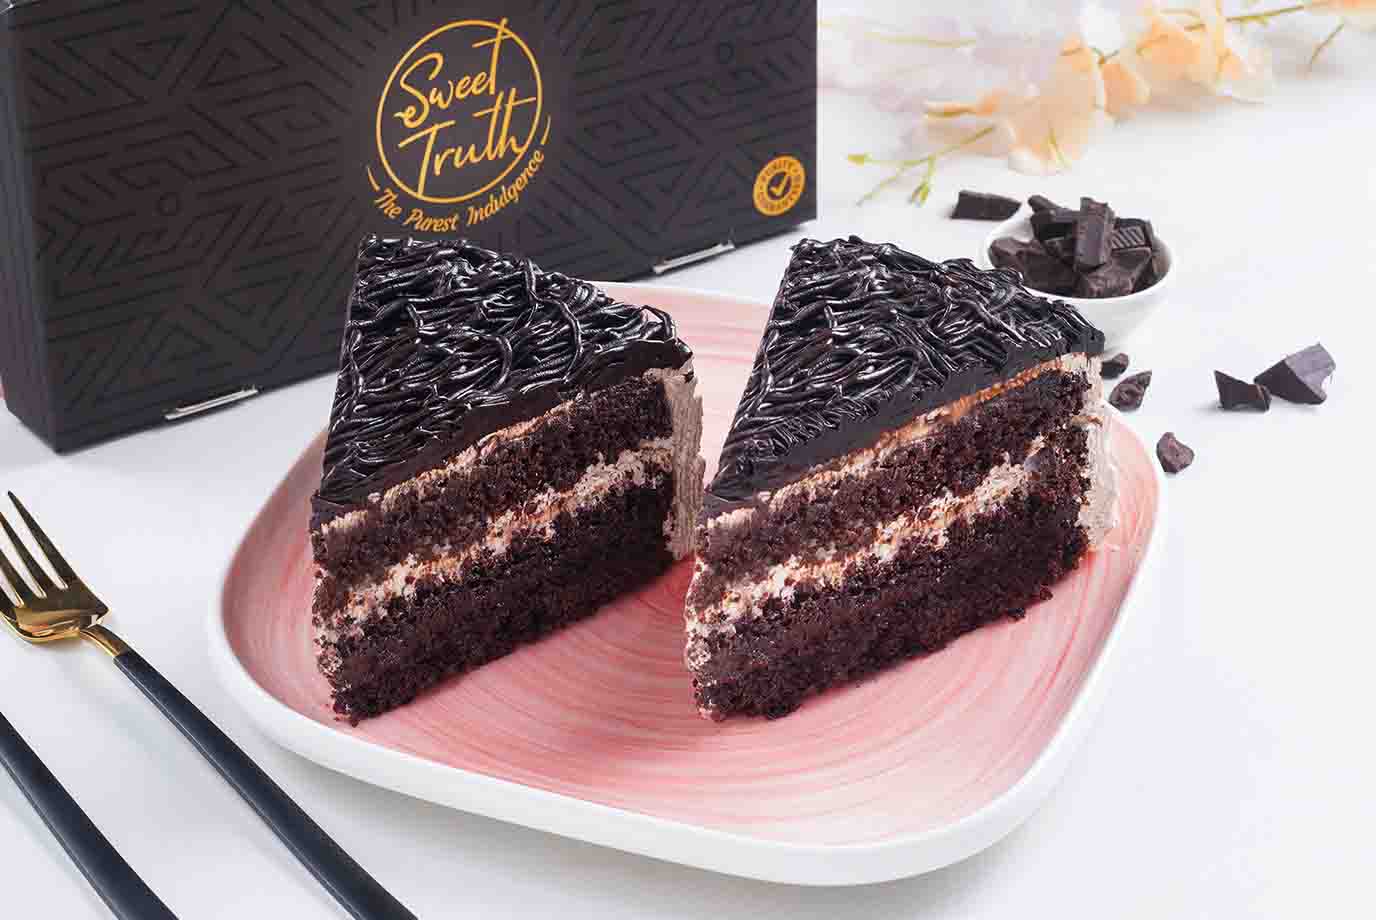 Update more than 80 coffee day cakes latest - awesomeenglish.edu.vn